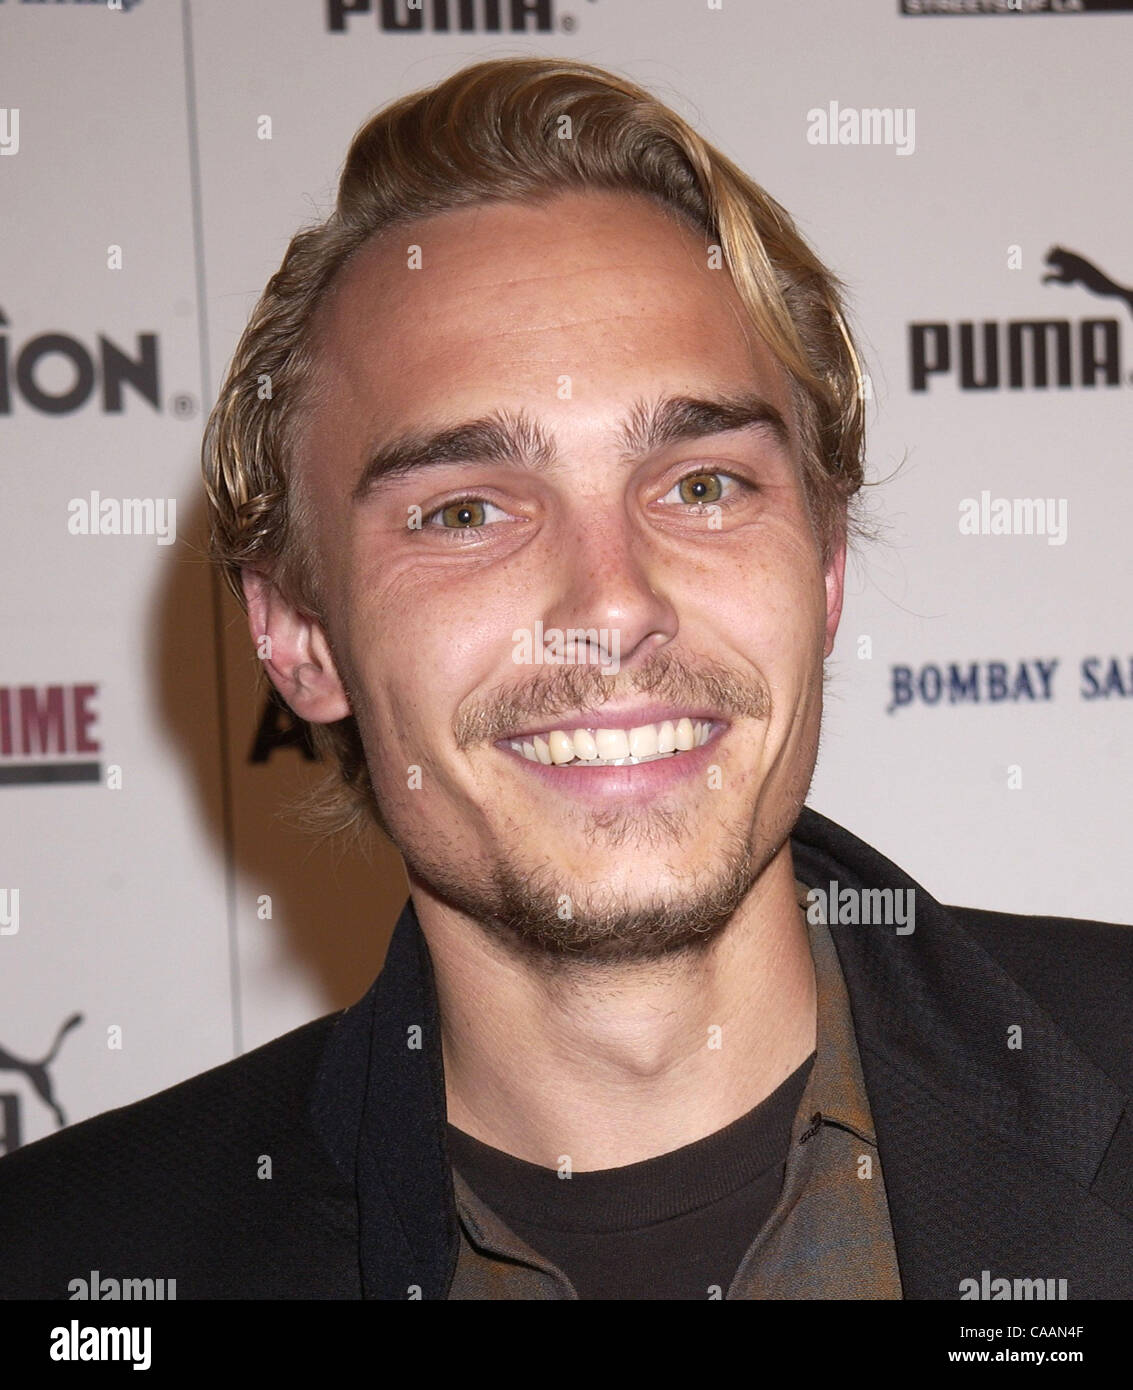 Nov 05, 2003; Los Angeles, CA, USA; Actor JOEY KERN at the 'True Crime  Streets of LA' Launch Party, sponsored byActivision and Puma, held at Ivar  Studios Stock Photo - Alamy